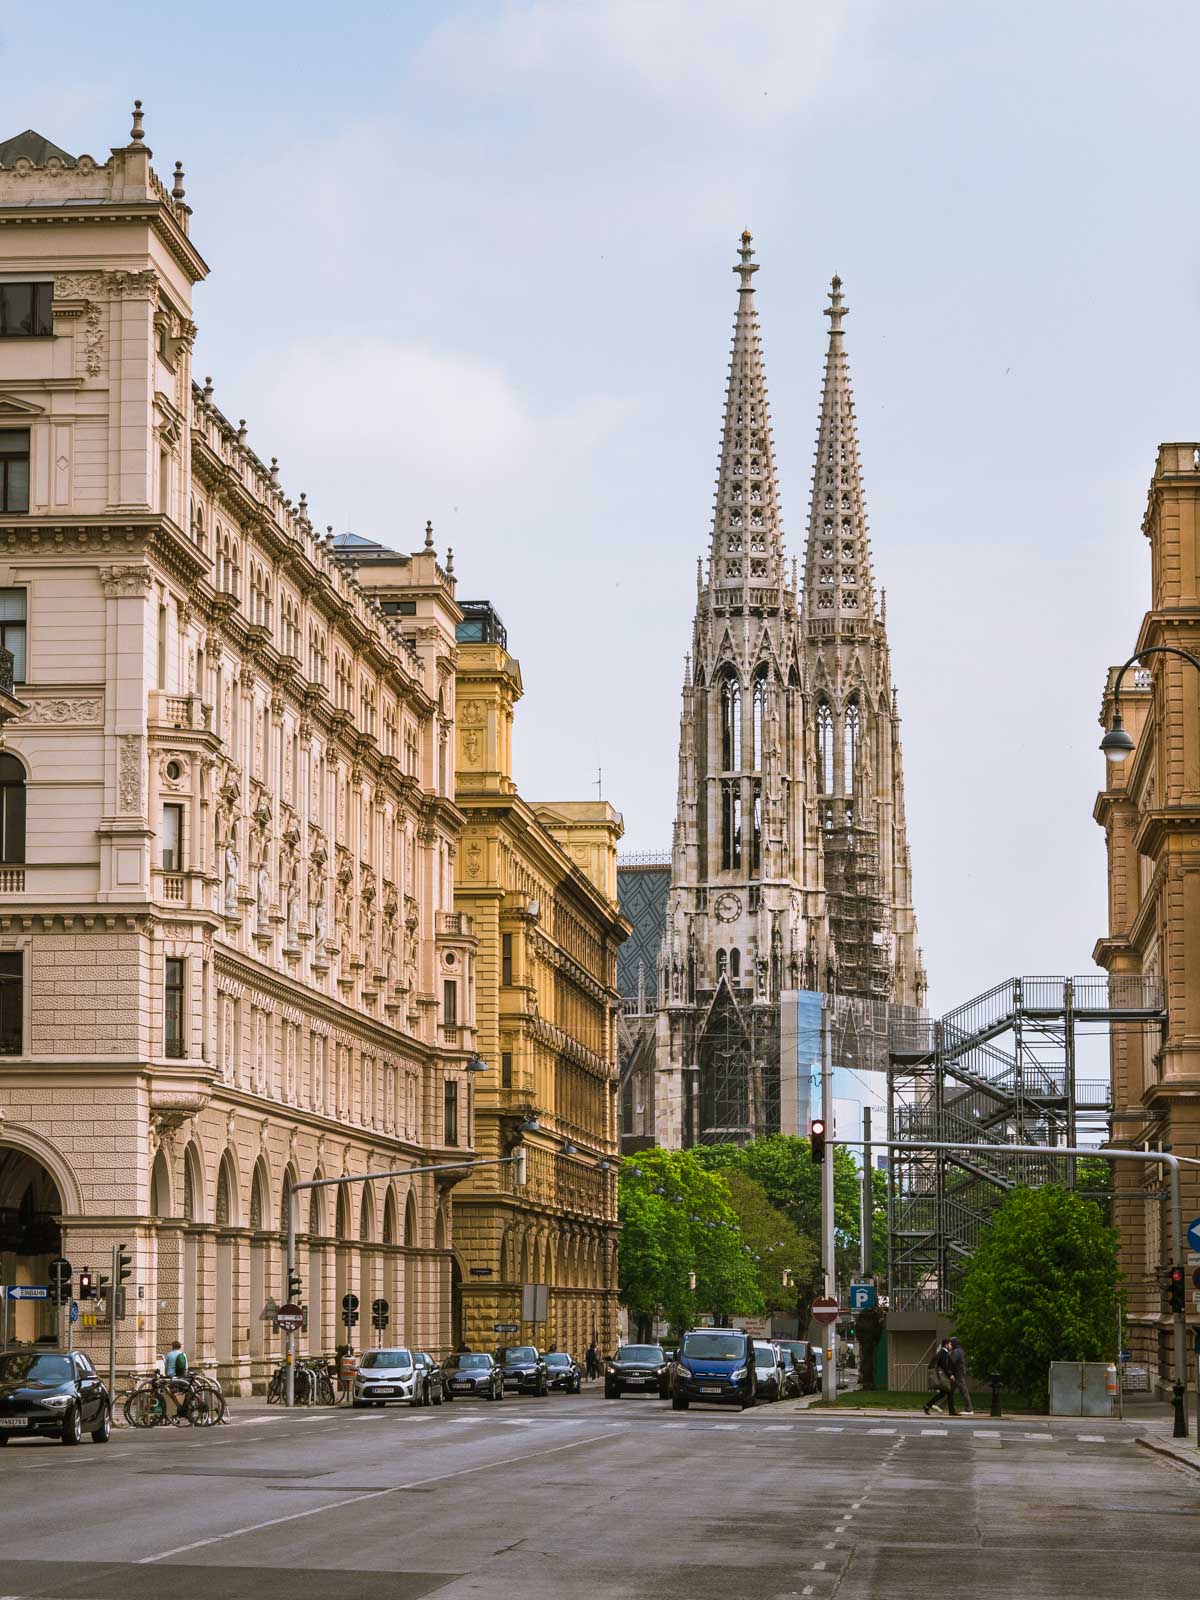 Street in Vienna with view of St. Stephen's Cathedral towers in distance.